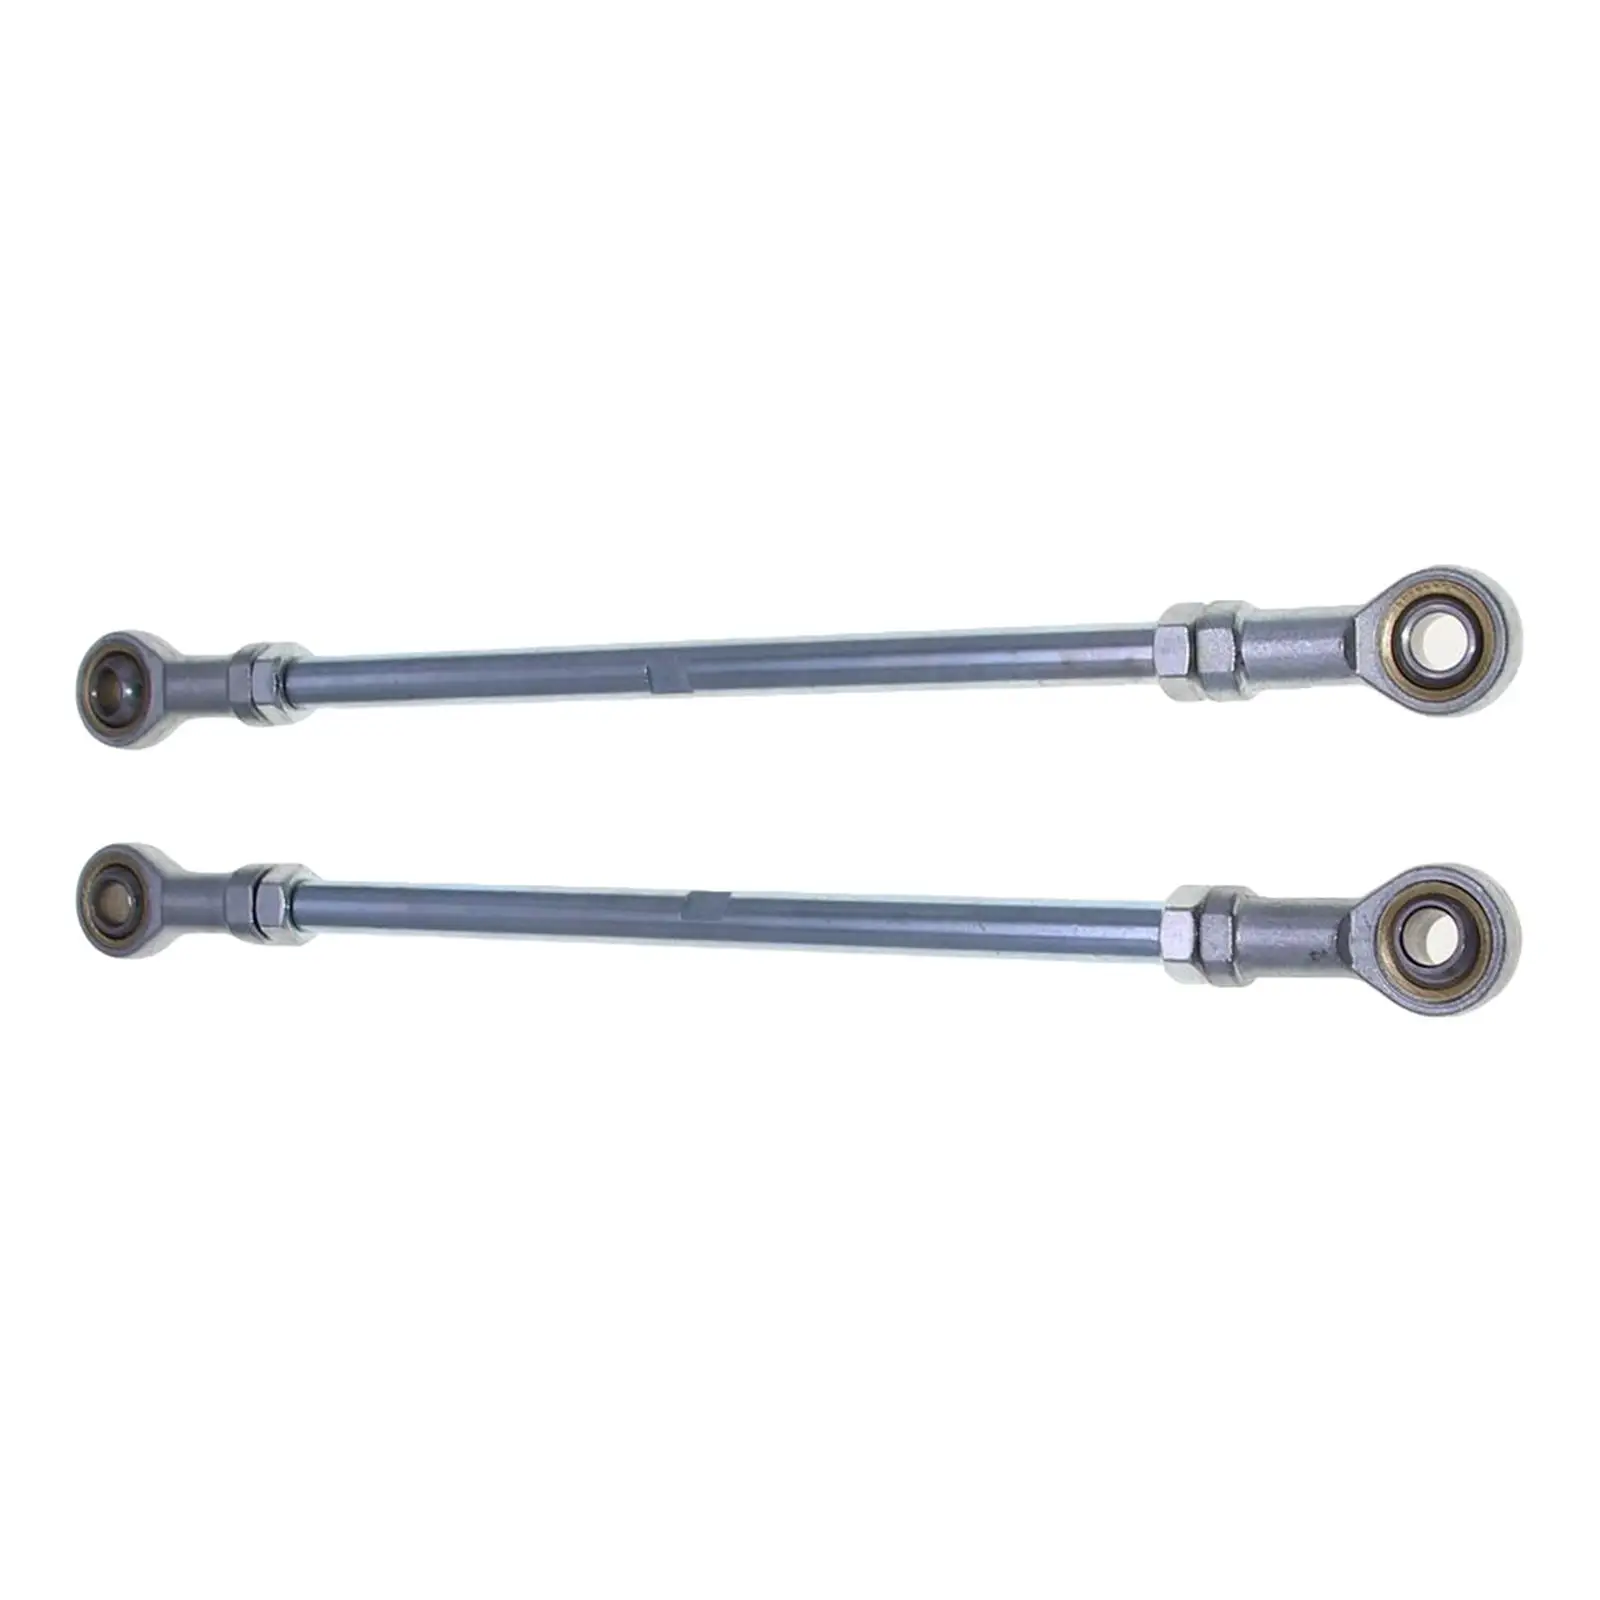 2 Pieces M10 Metal Bolt Tie Rod Ball Joiner Fit for 168 Go Kart ATV Karting